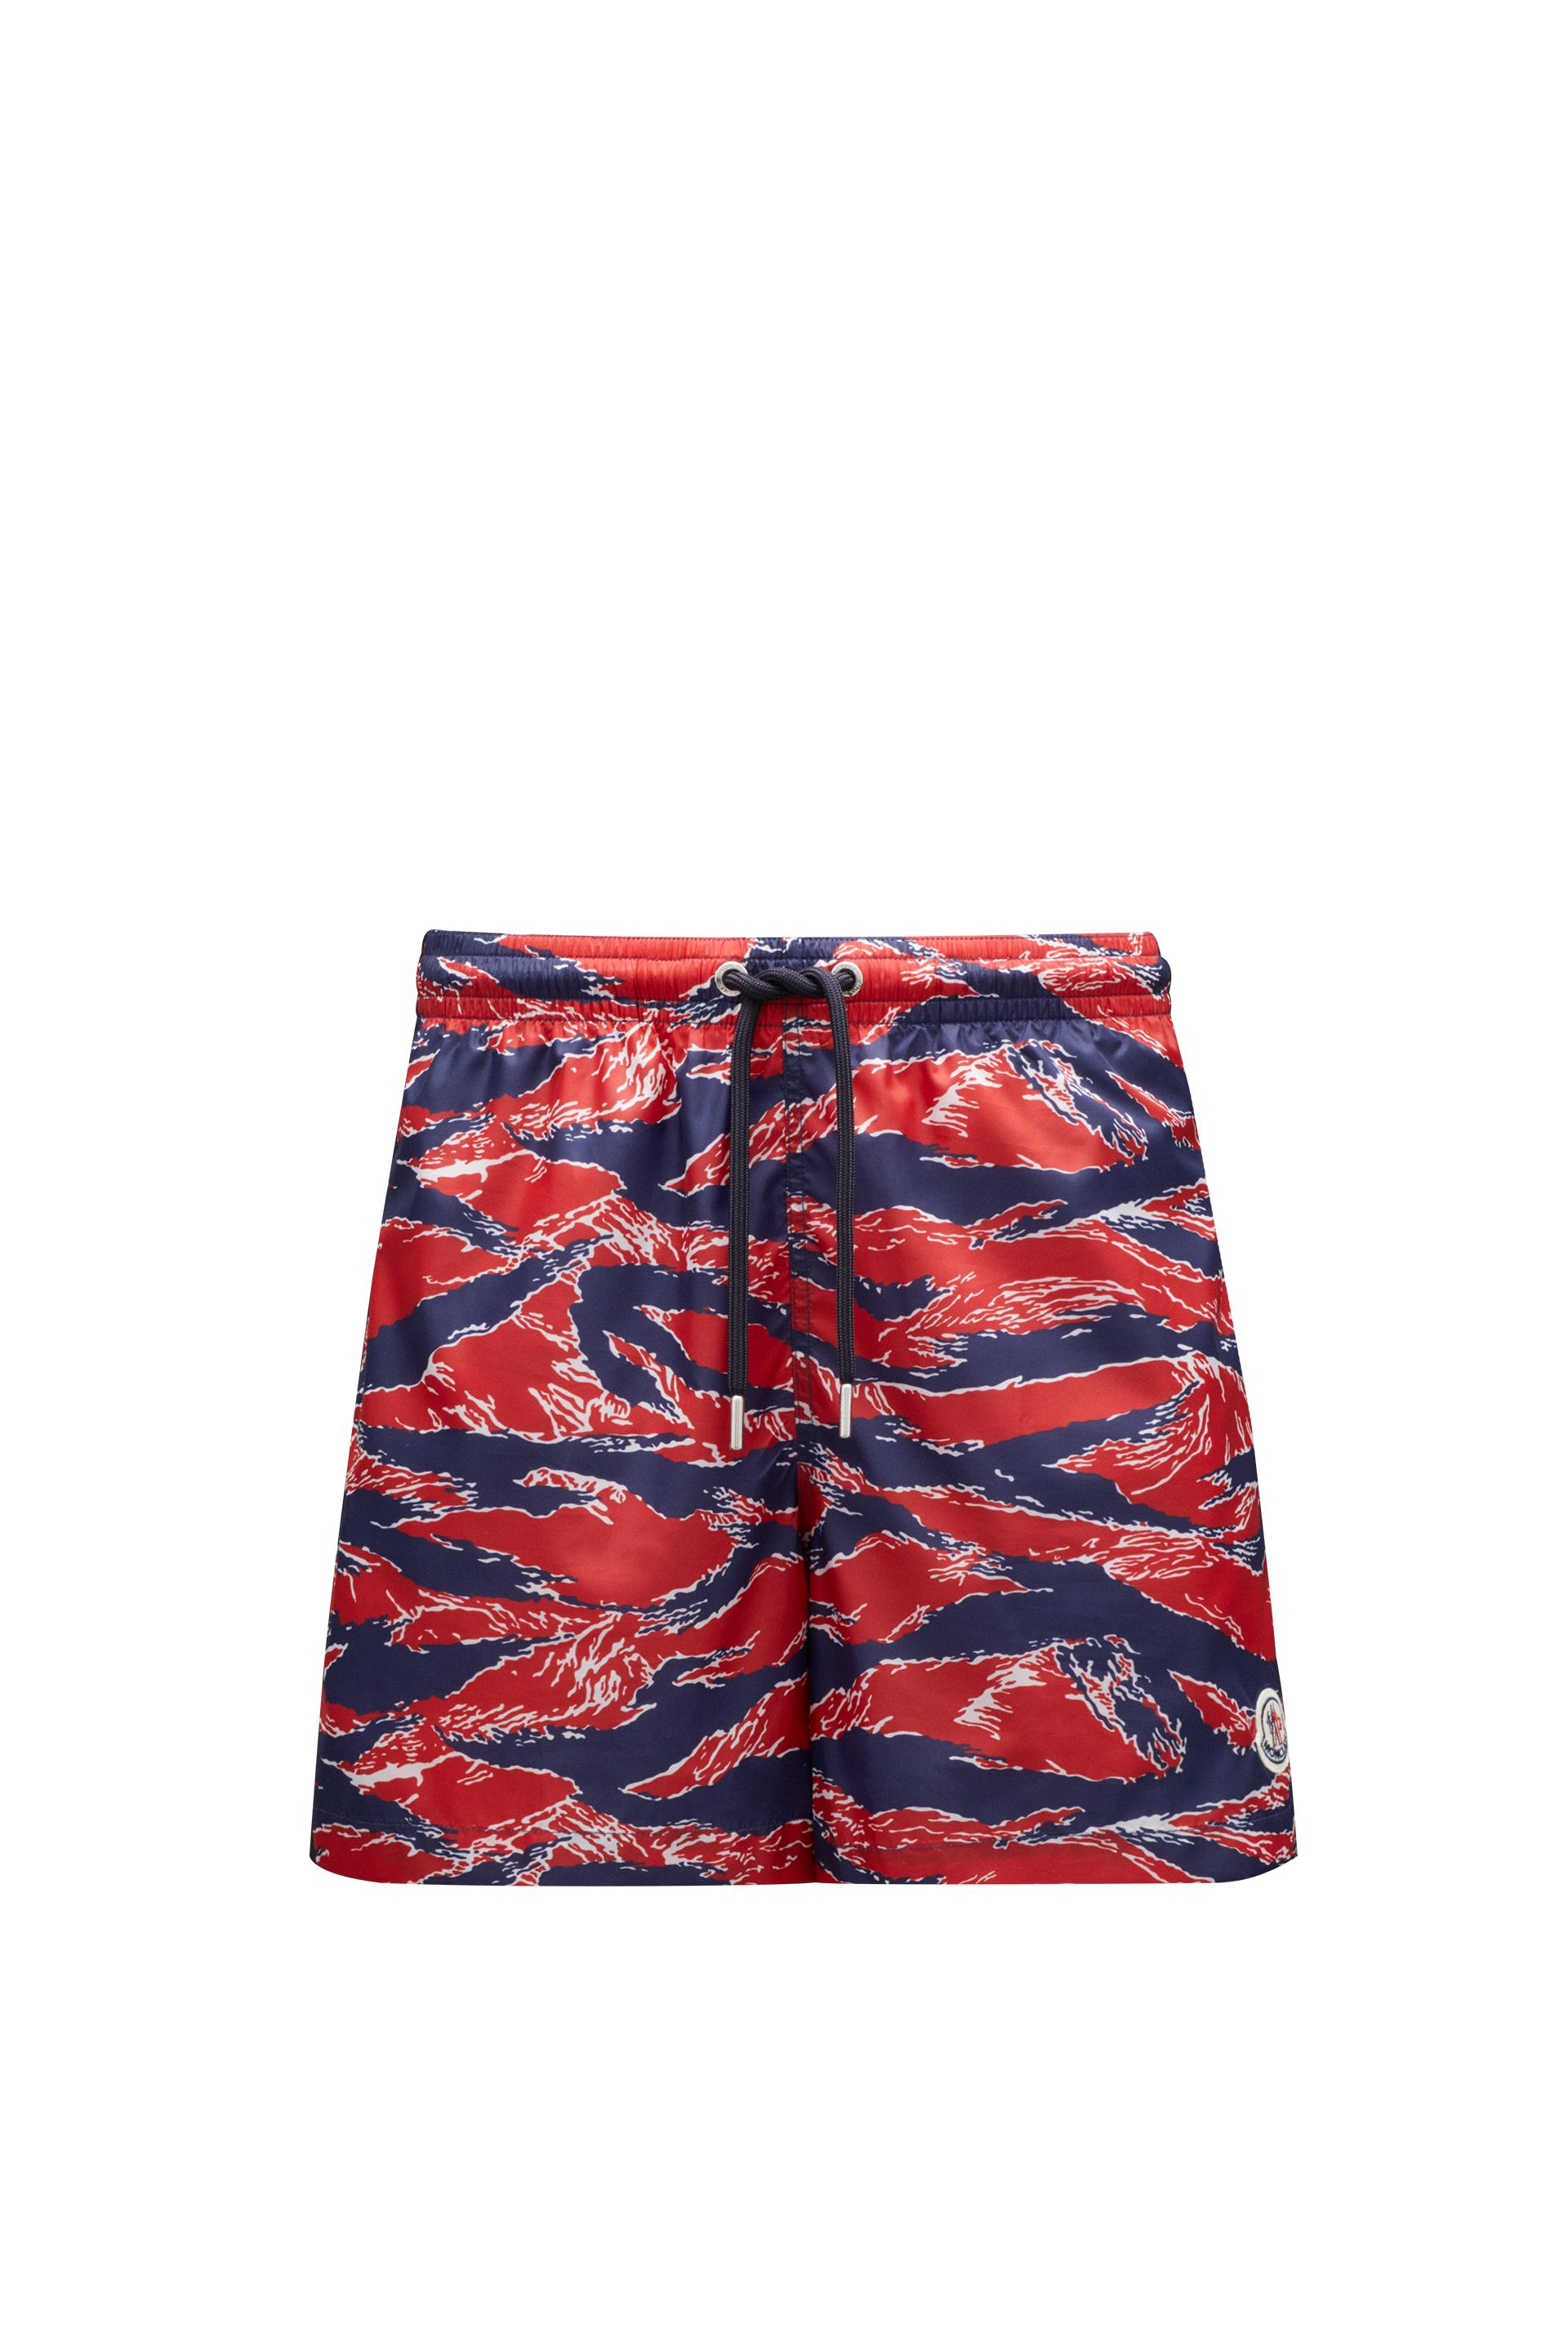 Moncler Tiger Print Swim Shorts in Red for Men | Lyst